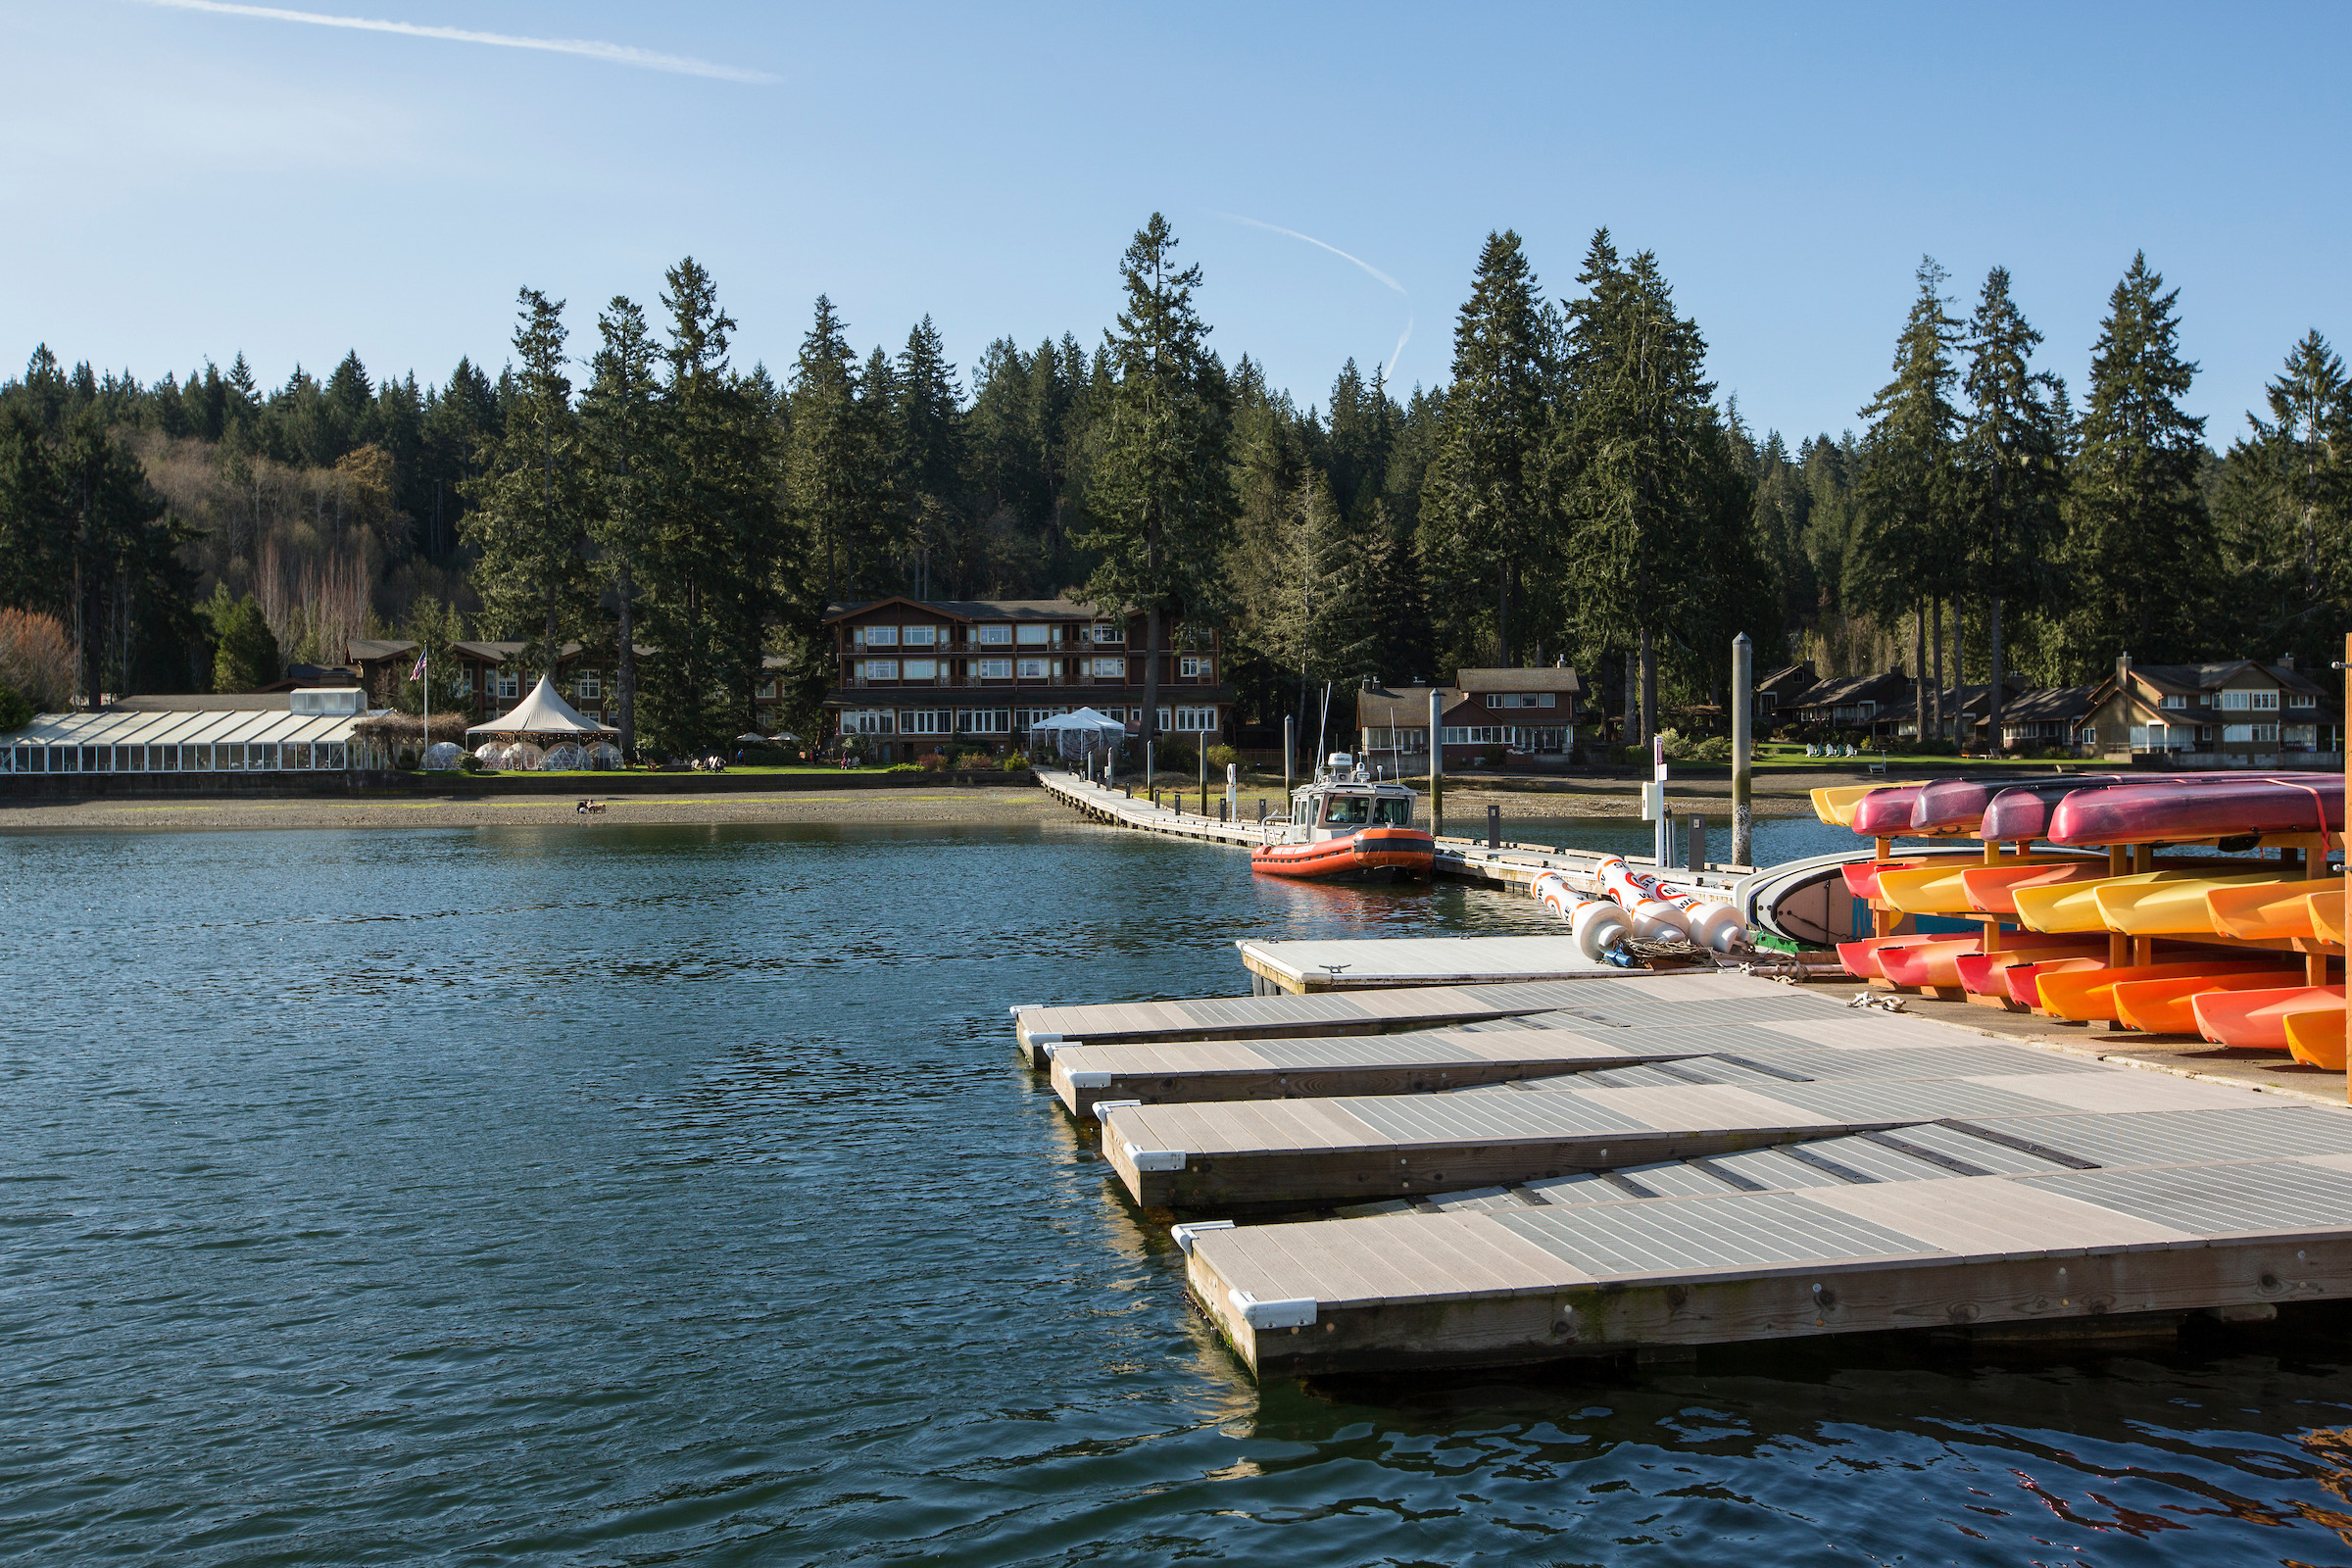 The dock of the Alderbrook Resort & Spa lined with kayaks and stand up paddle boards